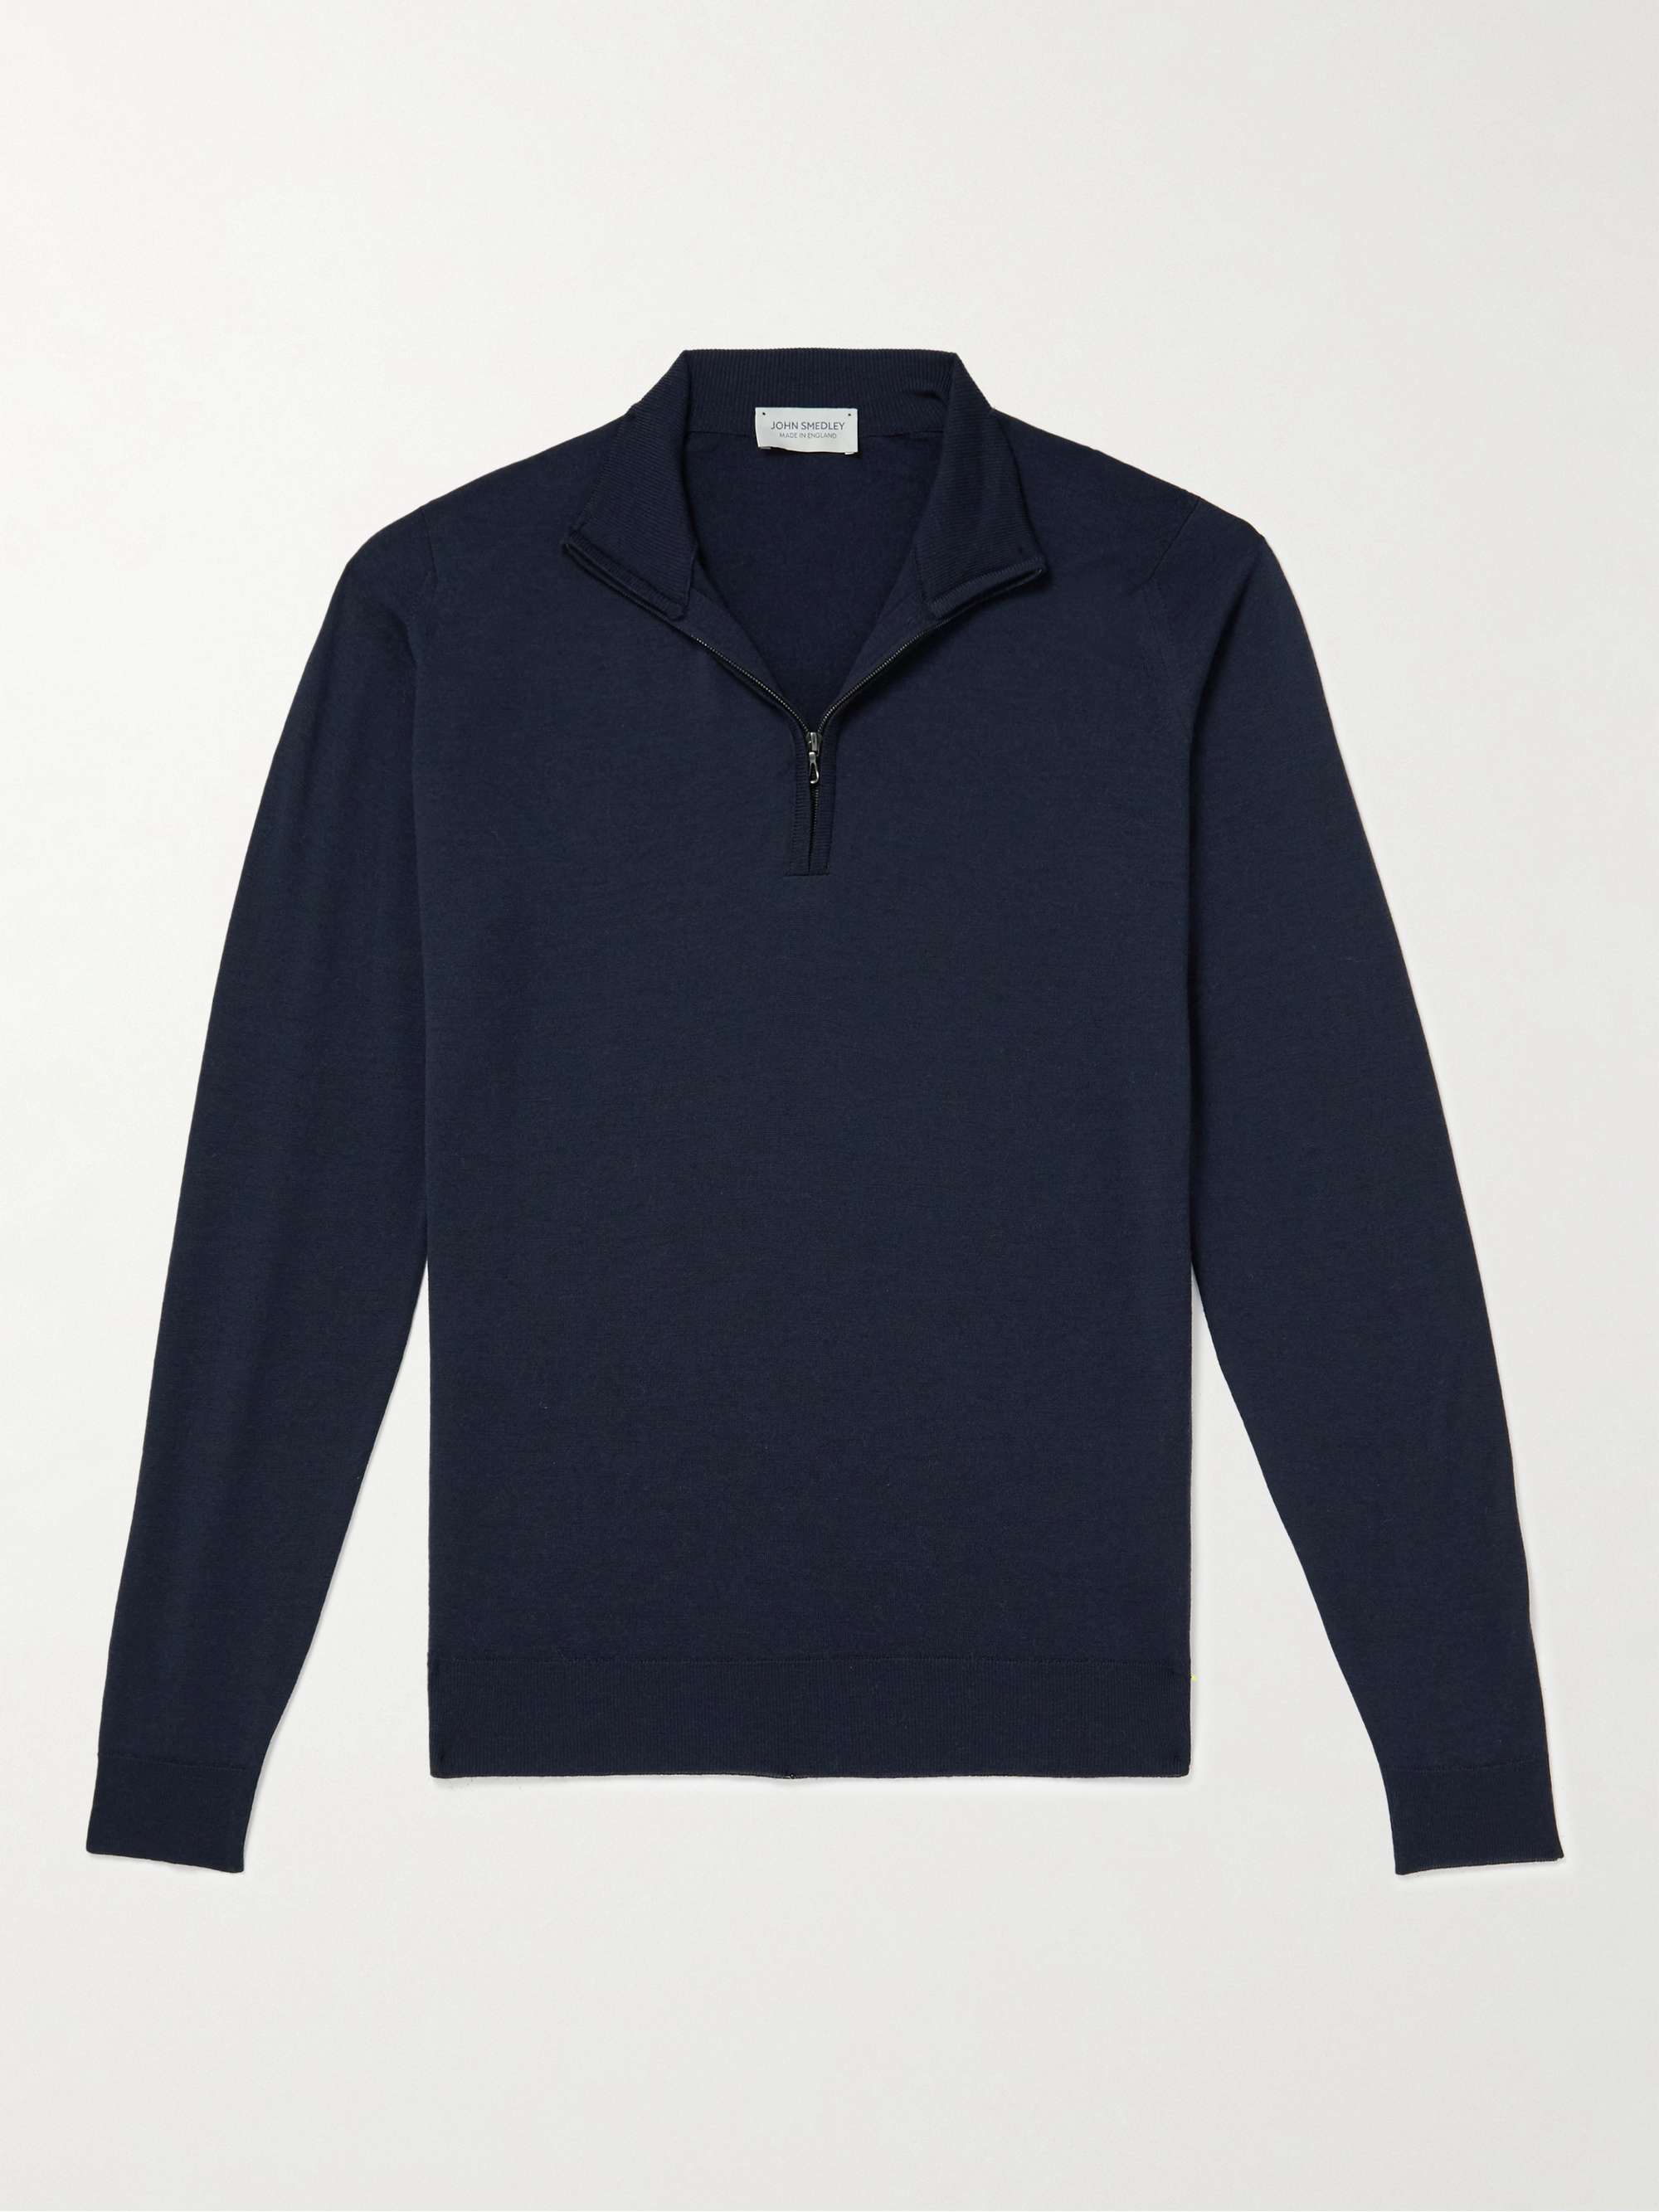 John Smedley Barrow Zip Pullover Sweater in Midnight Blue for Men Mens Clothing Sweaters and knitwear Zipped sweaters 